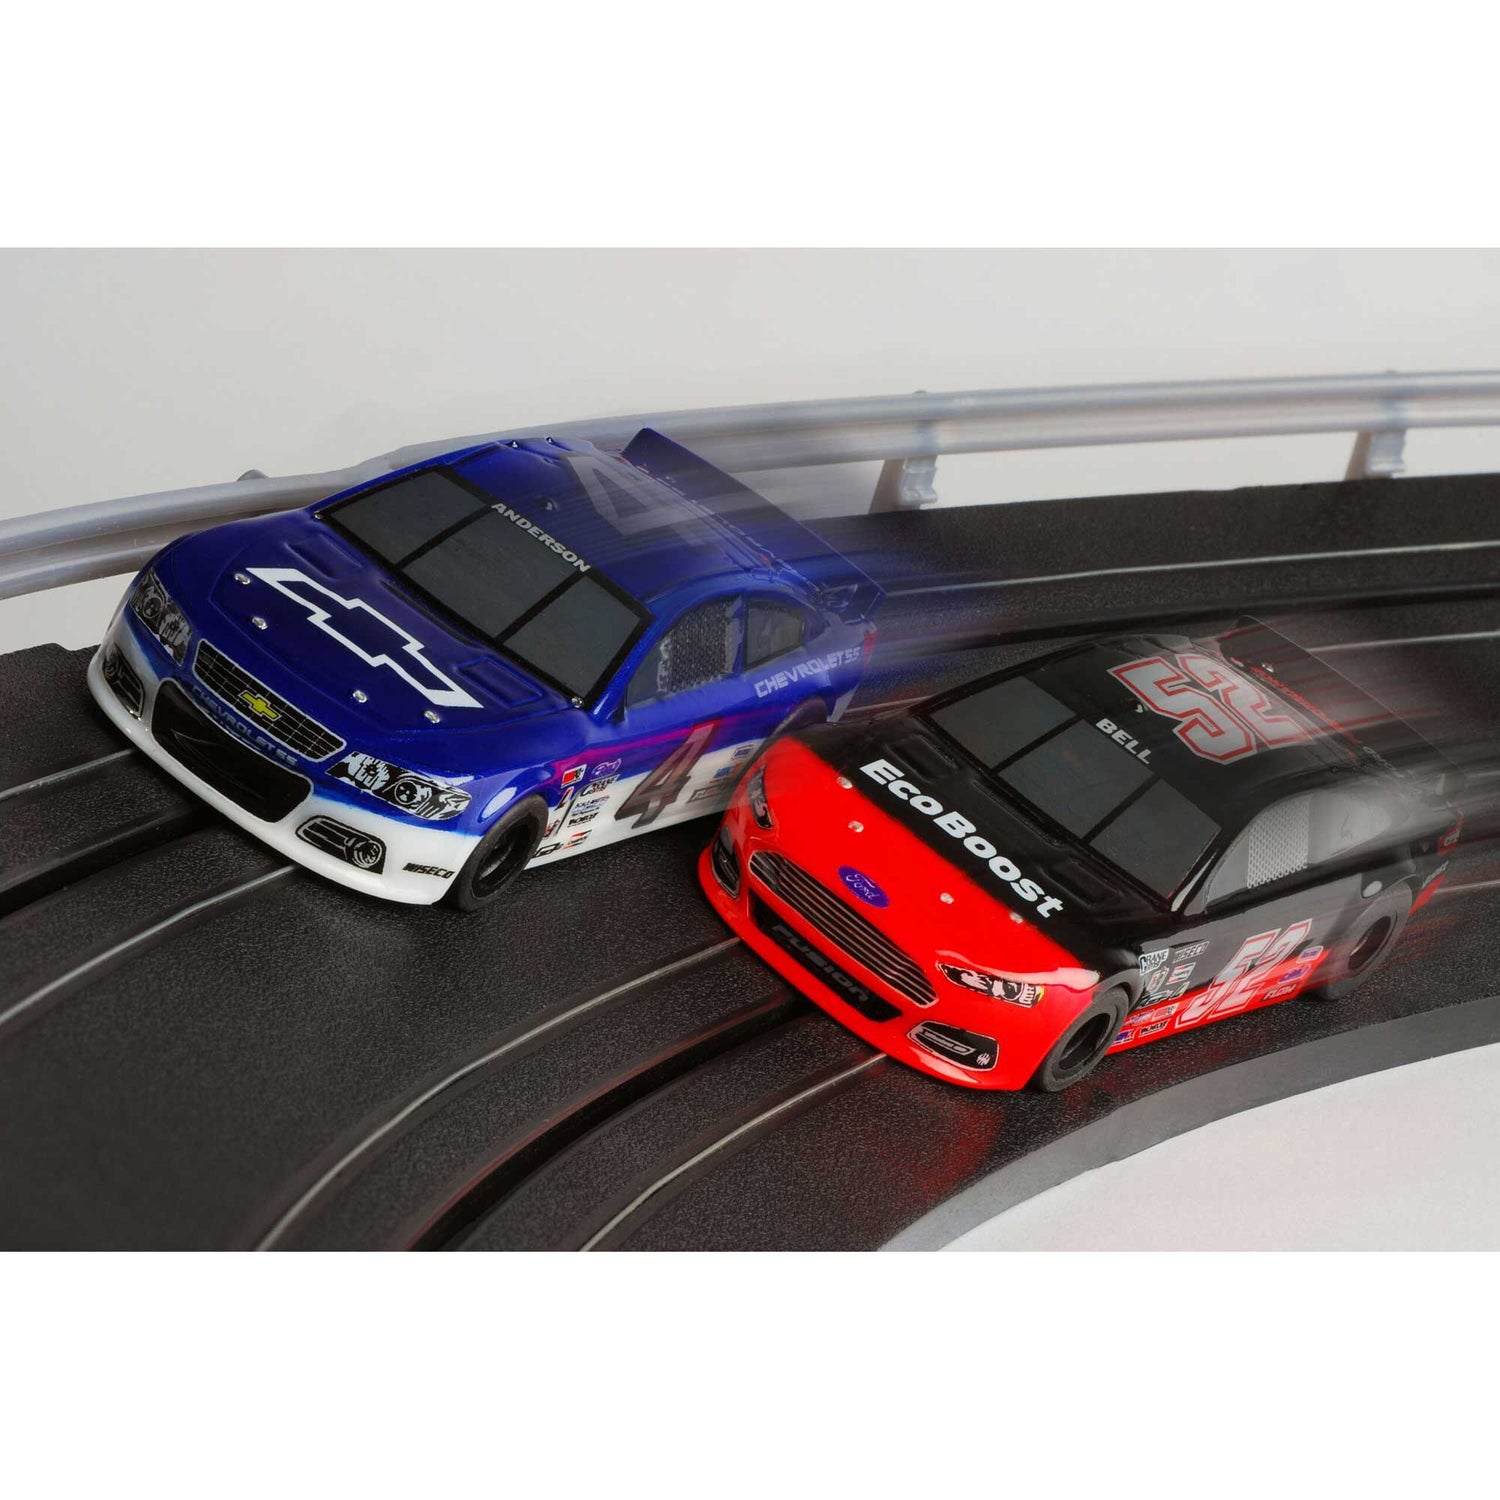 2 AFX Stock Cars HO Scale Slot Cars on the model track